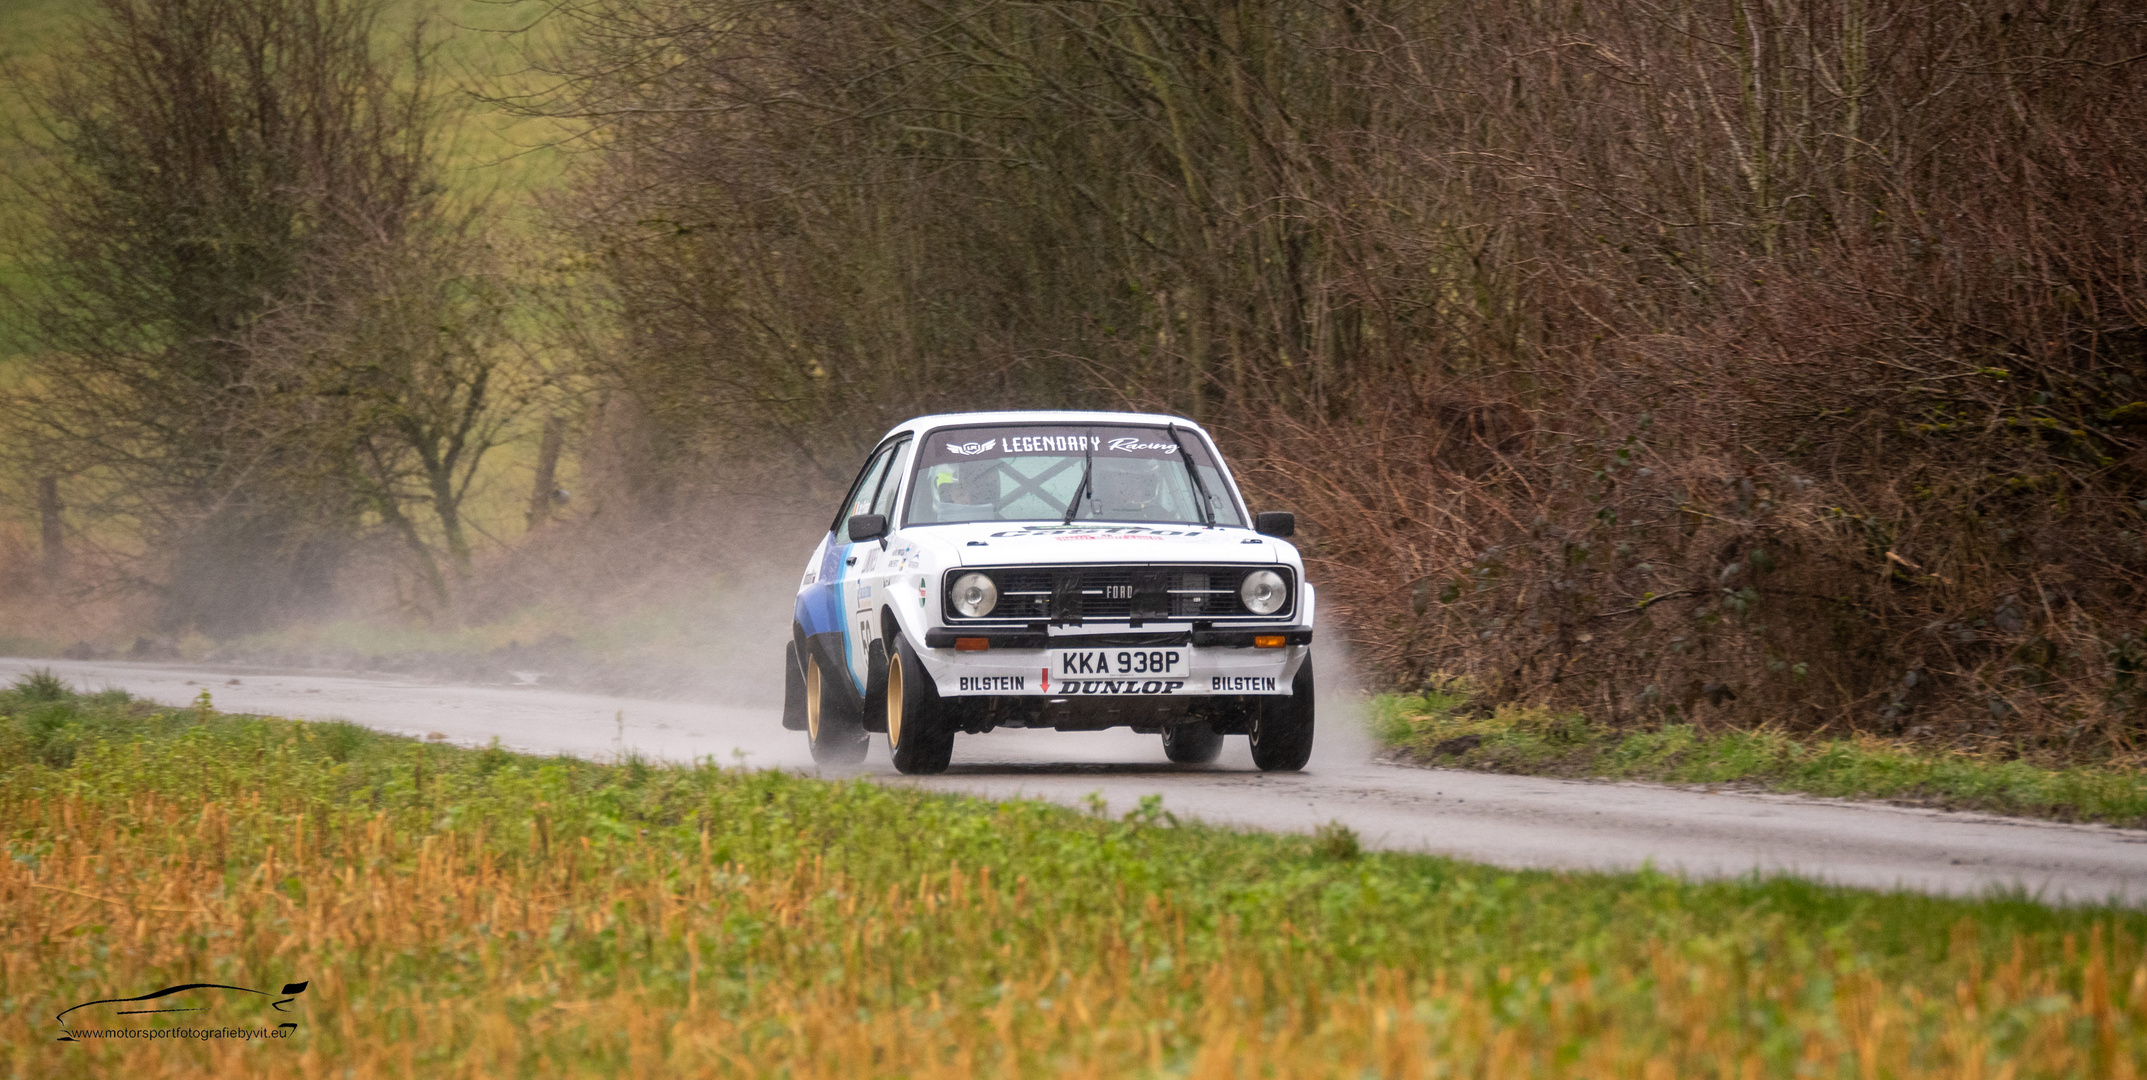 Ford Escort in Rallying Saison 2020 Part 8